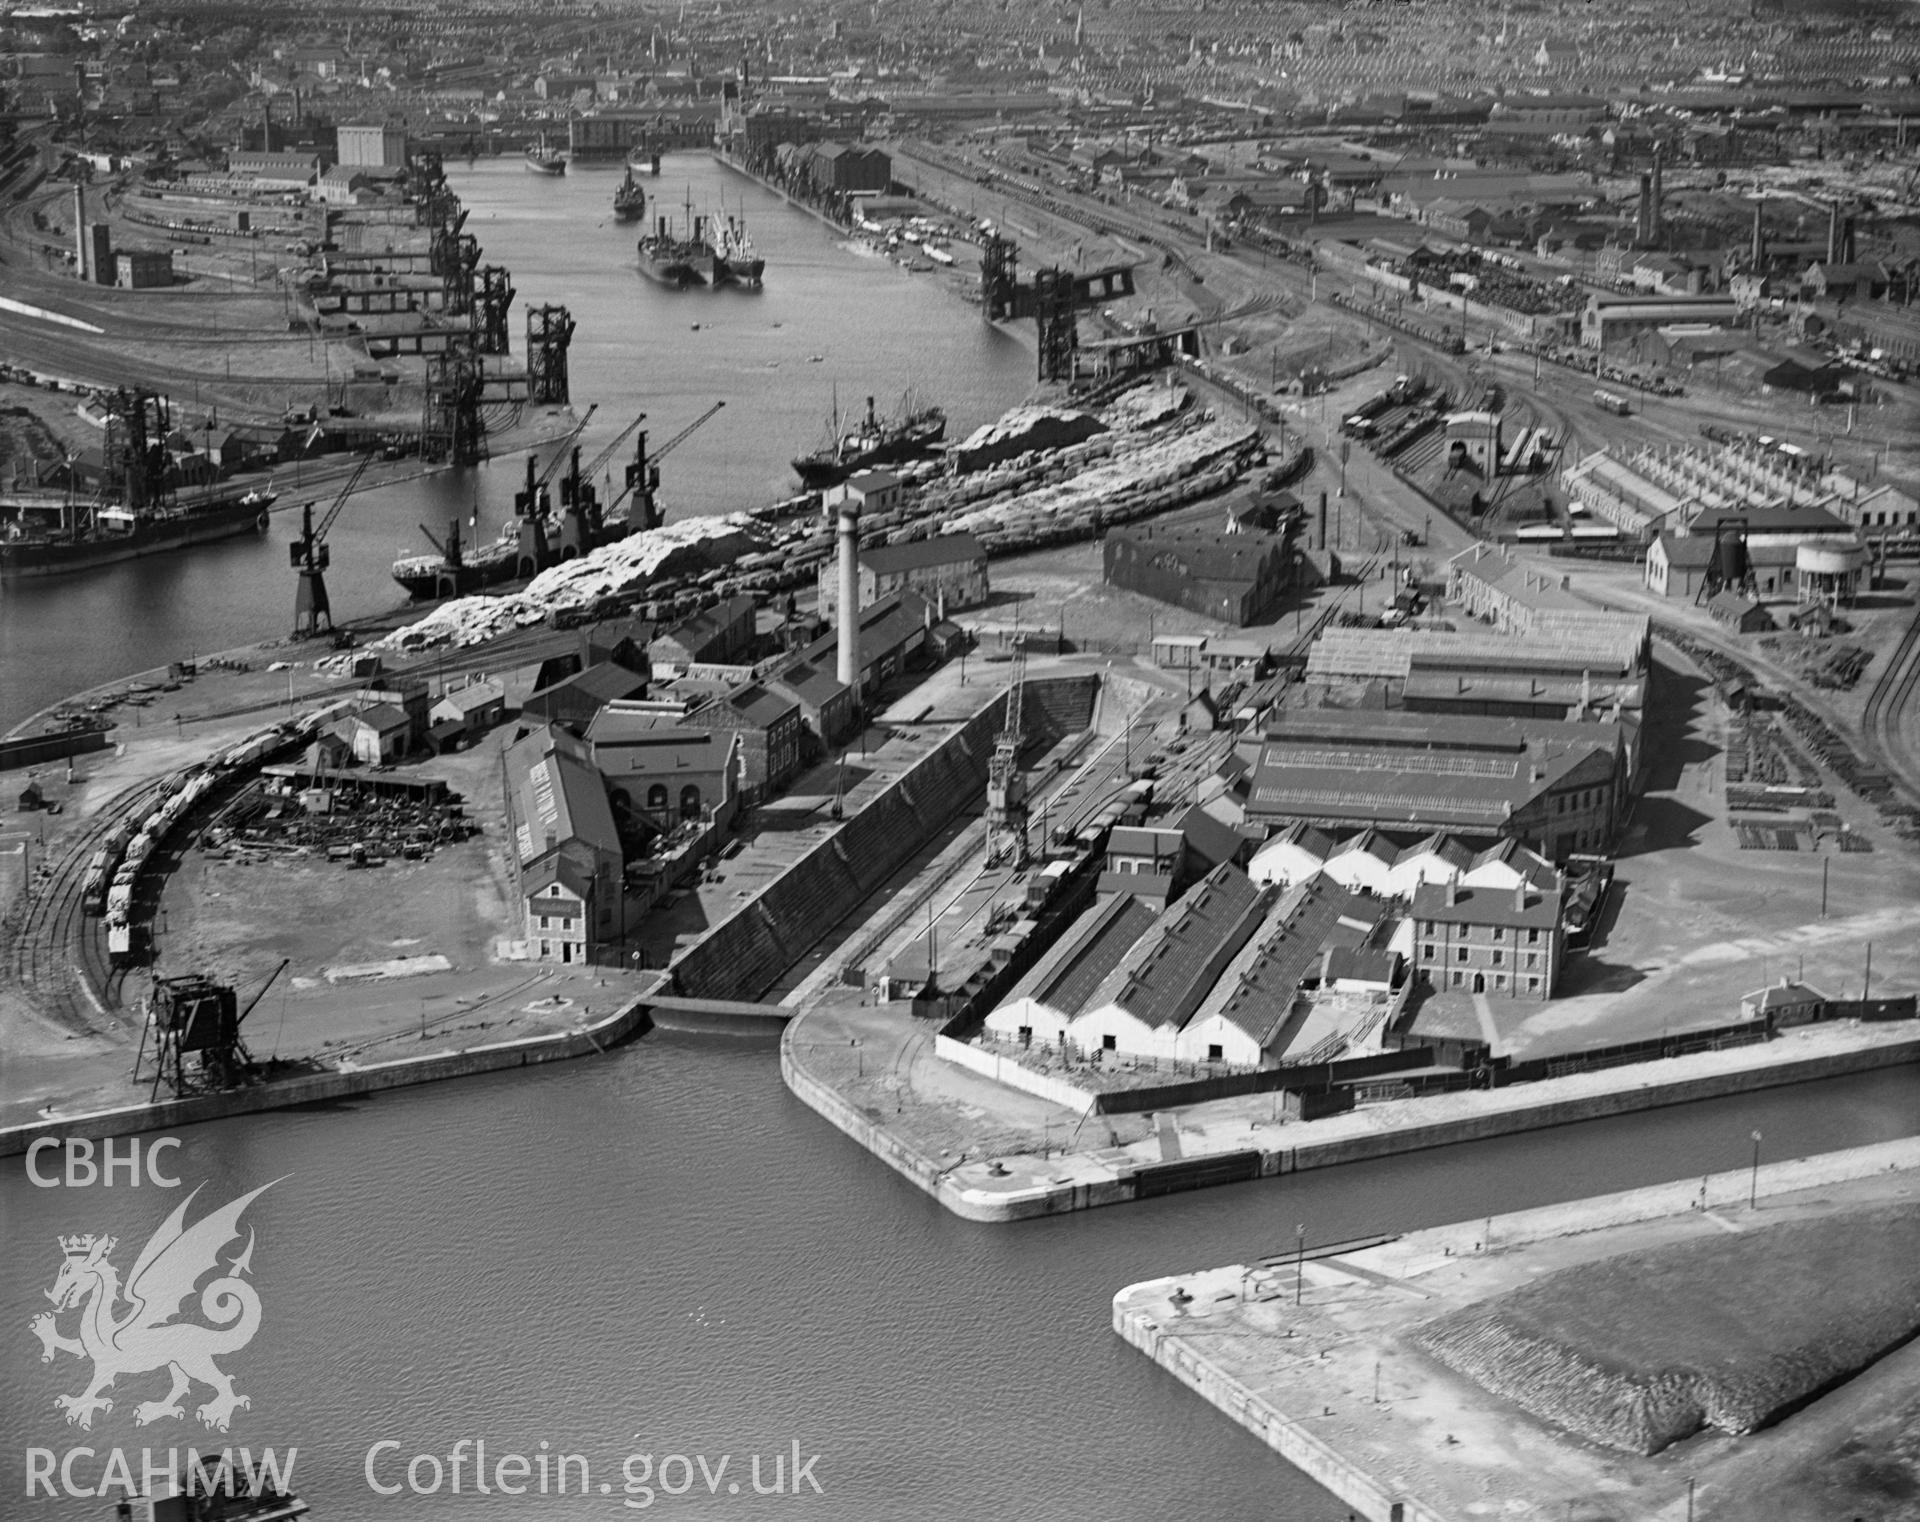 Black and white oblique aerial photograph showing the docks at Cardiff, from Aerofilms album Cardiff (W22), taken by Aerofilms Ltd and dated 1934.